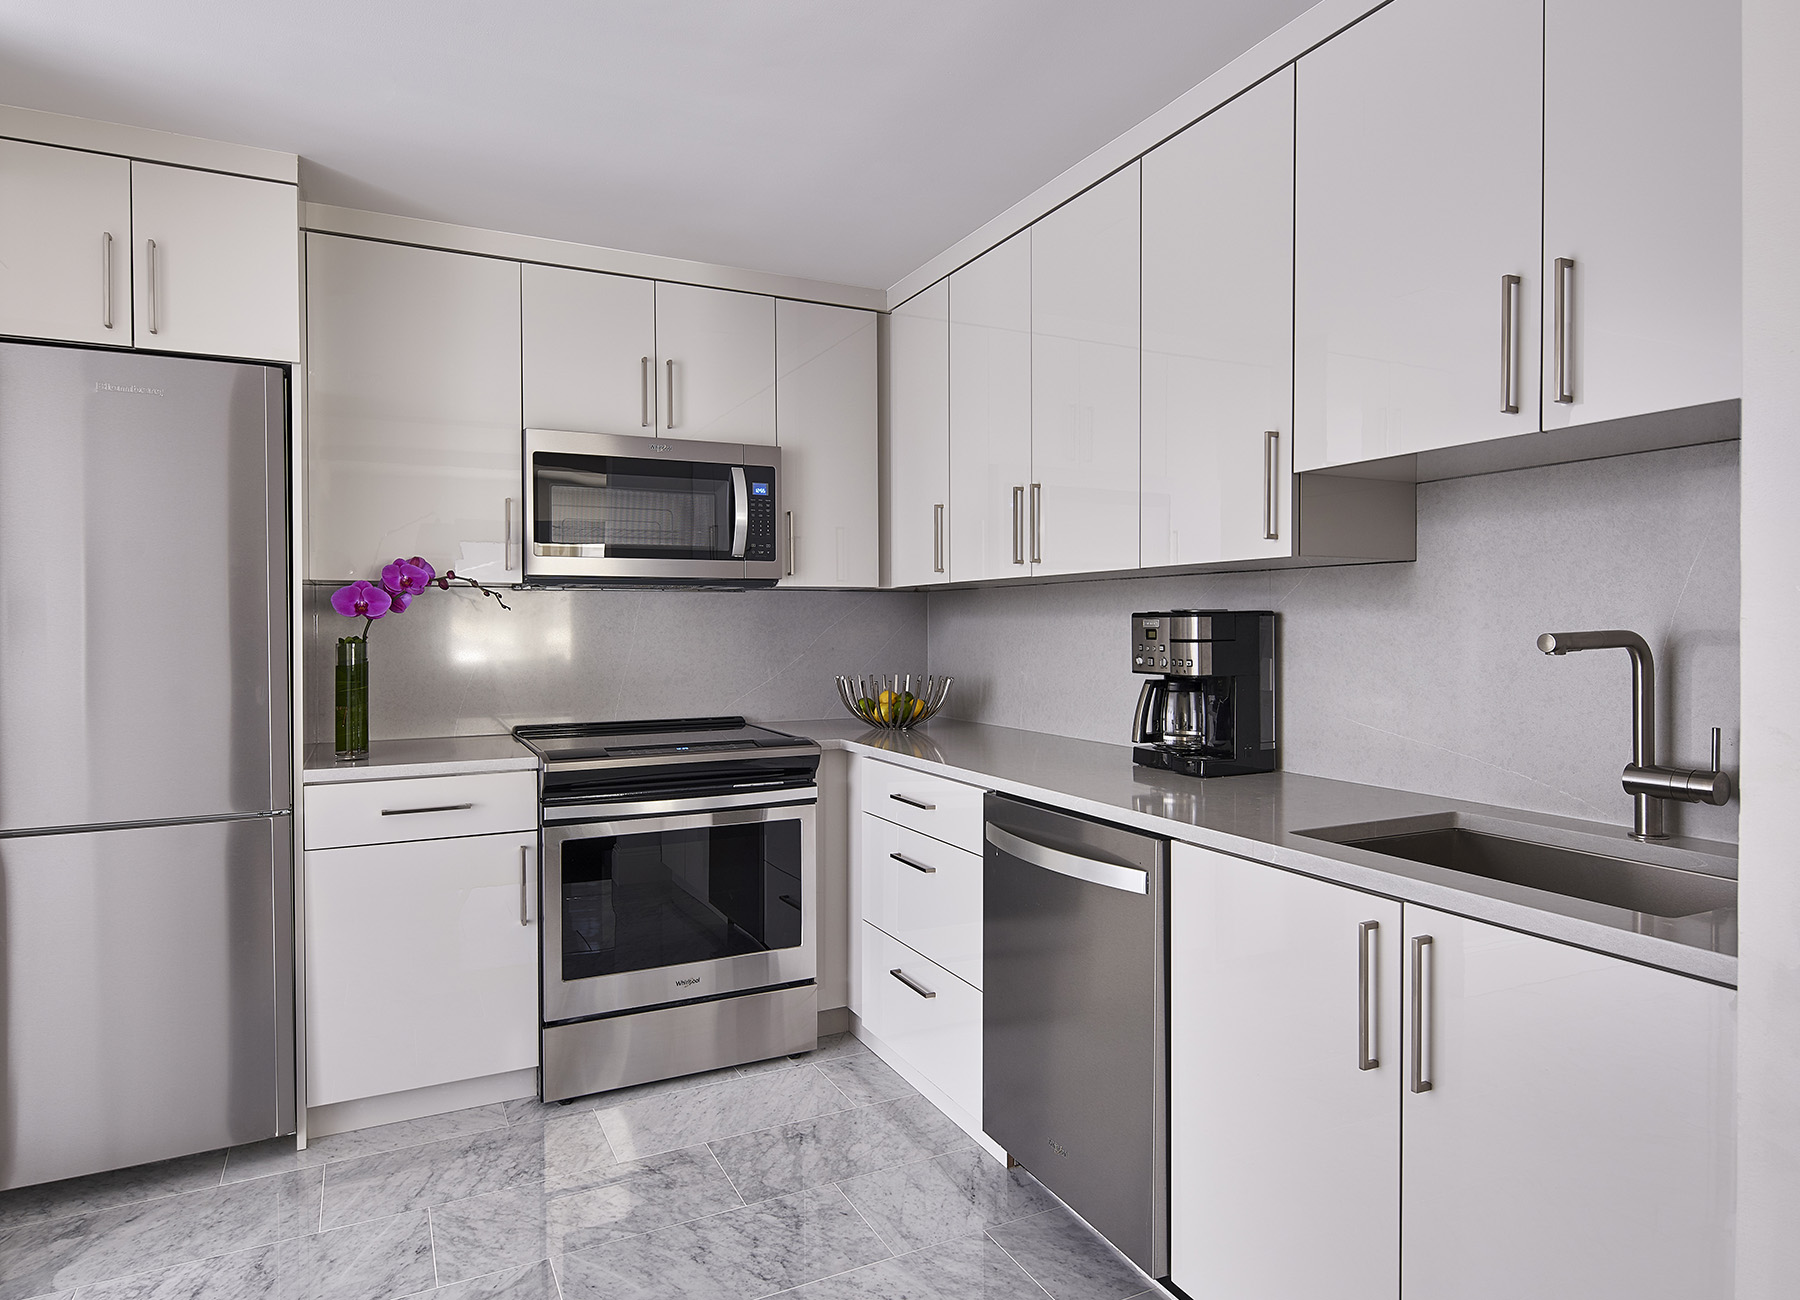 AKA Central Park furnished apartment kitchen with white countertops and full-sized appliances